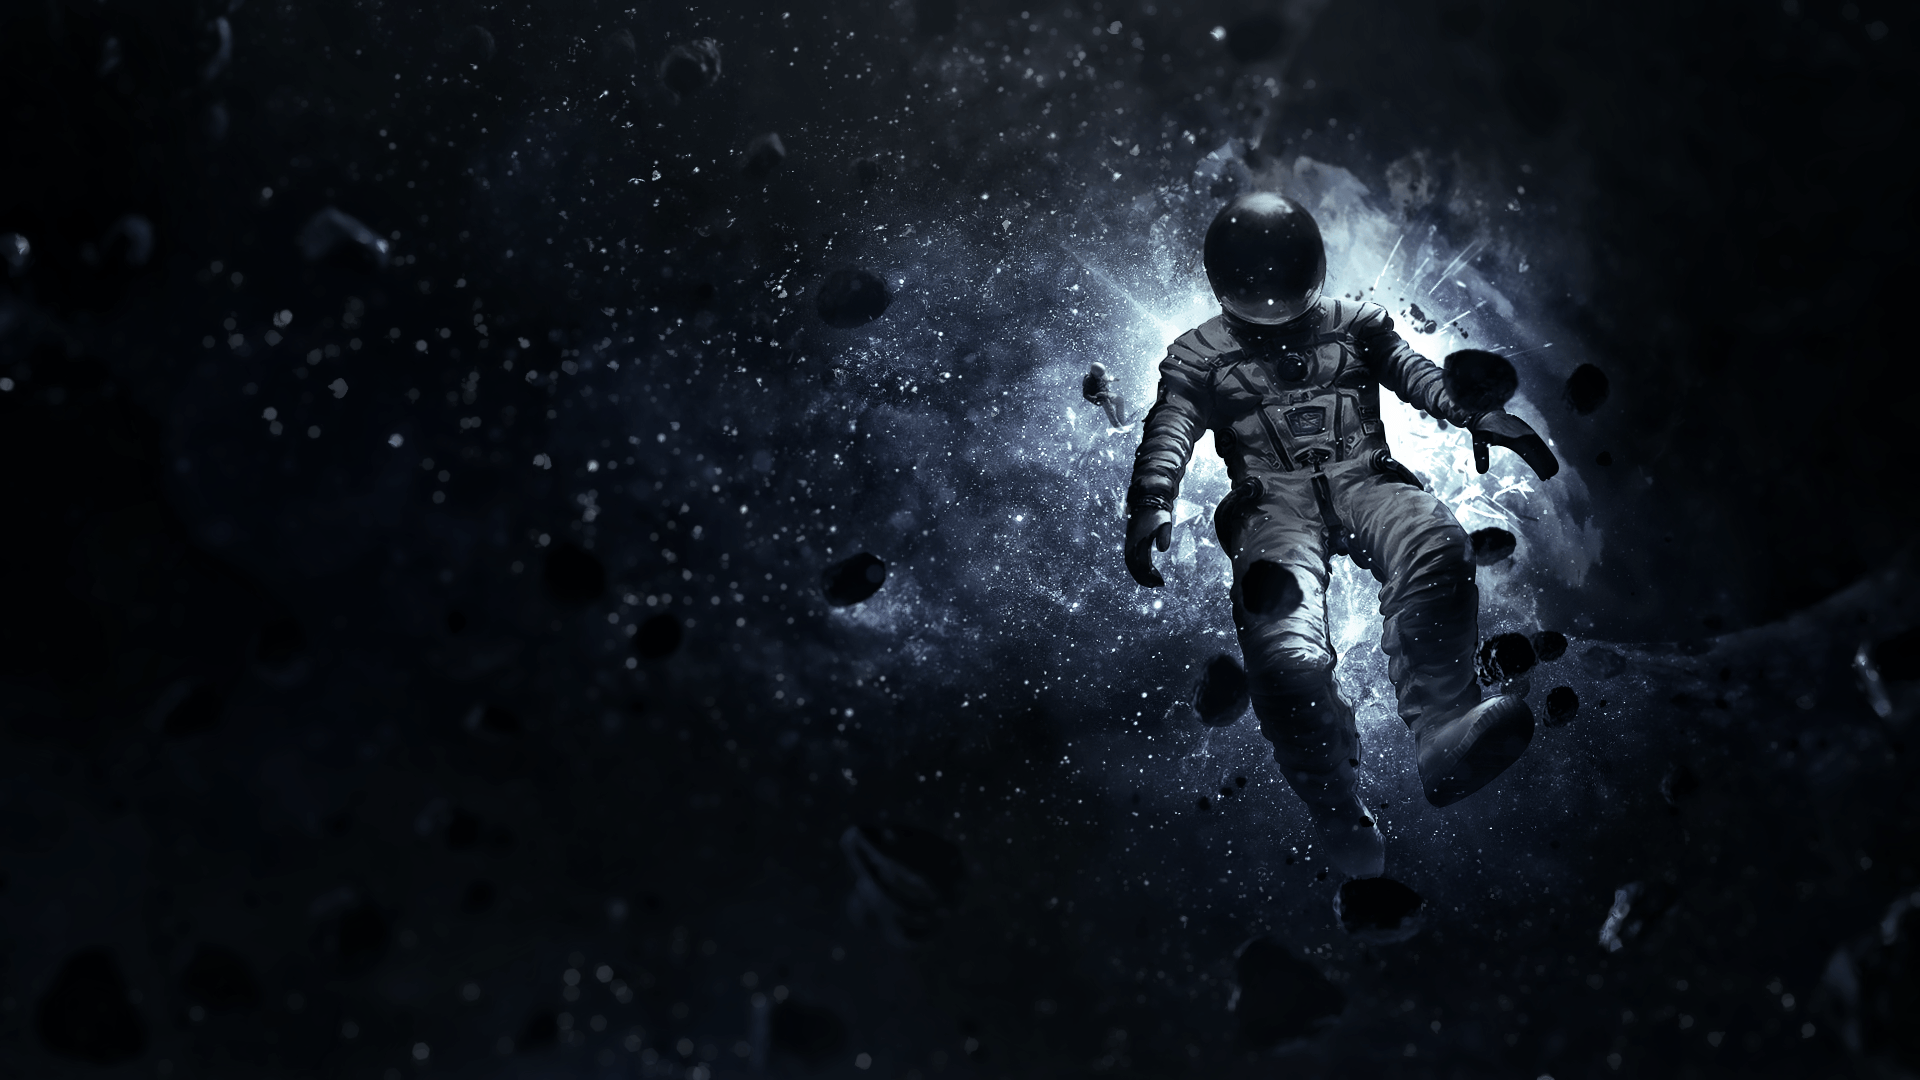 Imgur: The most awesome image on the Internet. Astronaut wallpaper, Wallpaper space, Space artwork